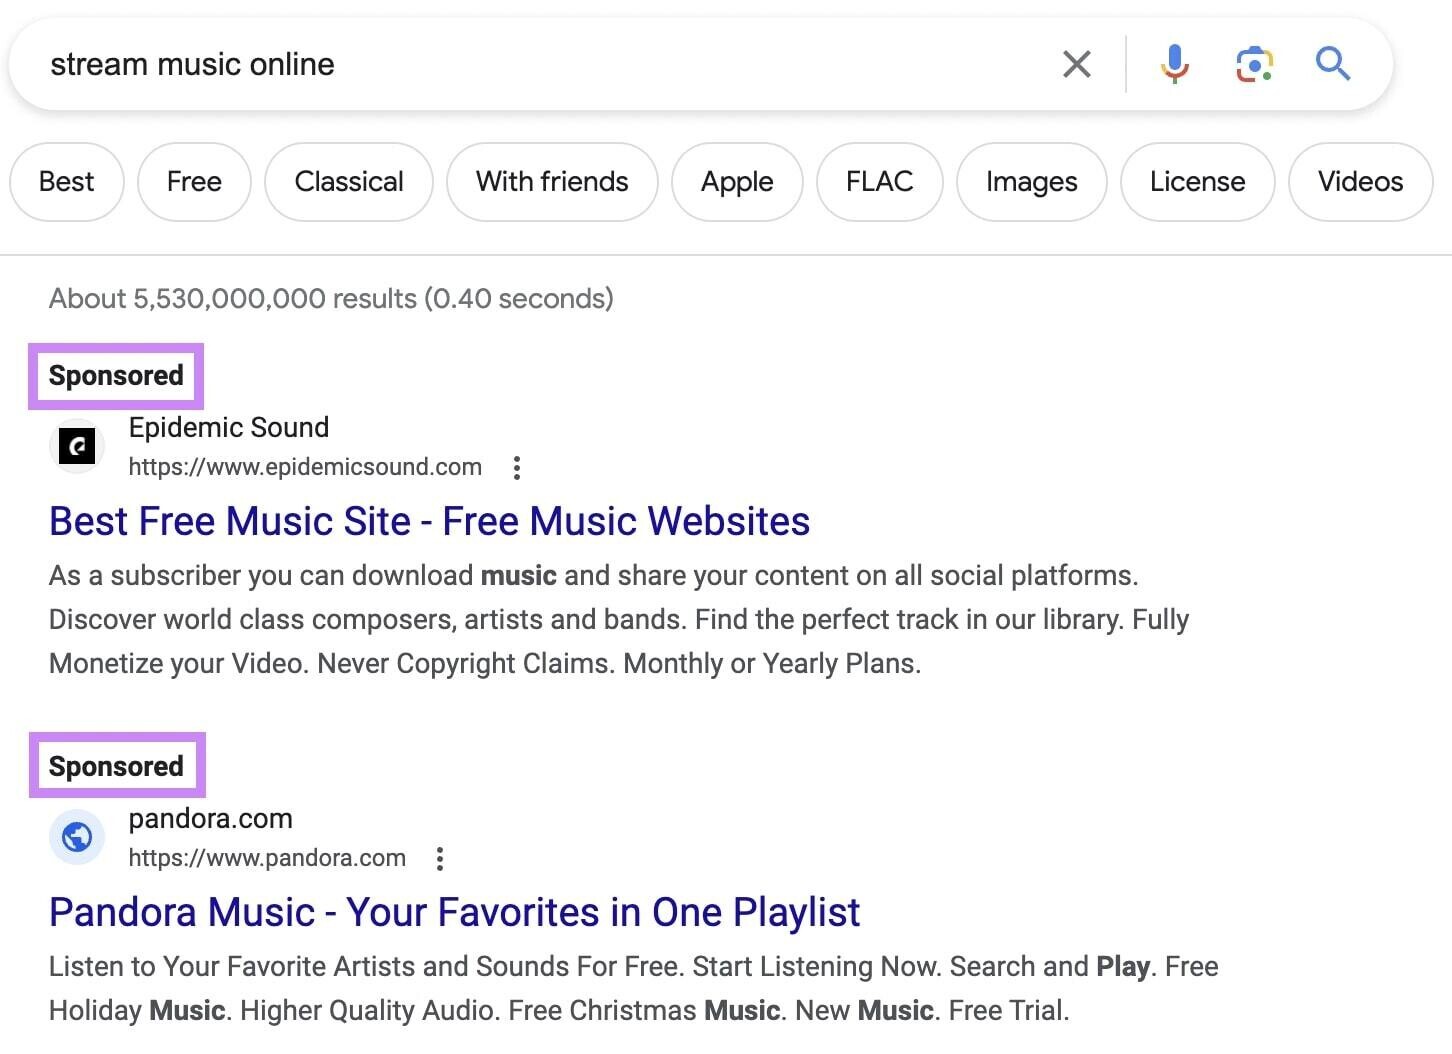 an example of PPC ads in Google SERP for "stream music online" search